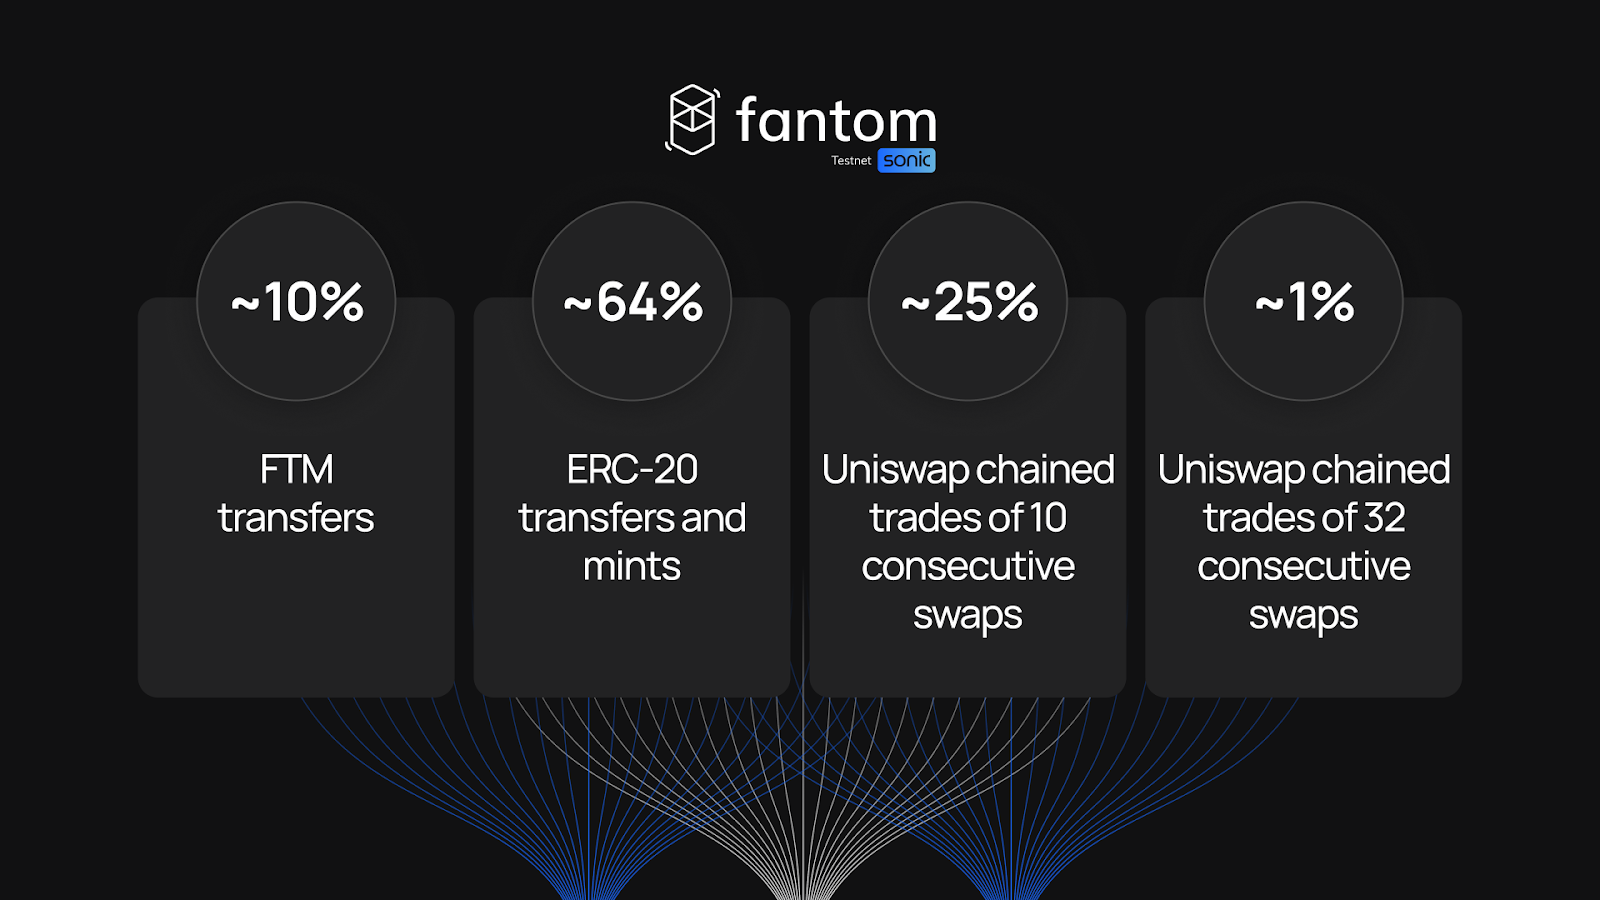 3 Incredible Performances from Fantom Sonic Closed Testnet